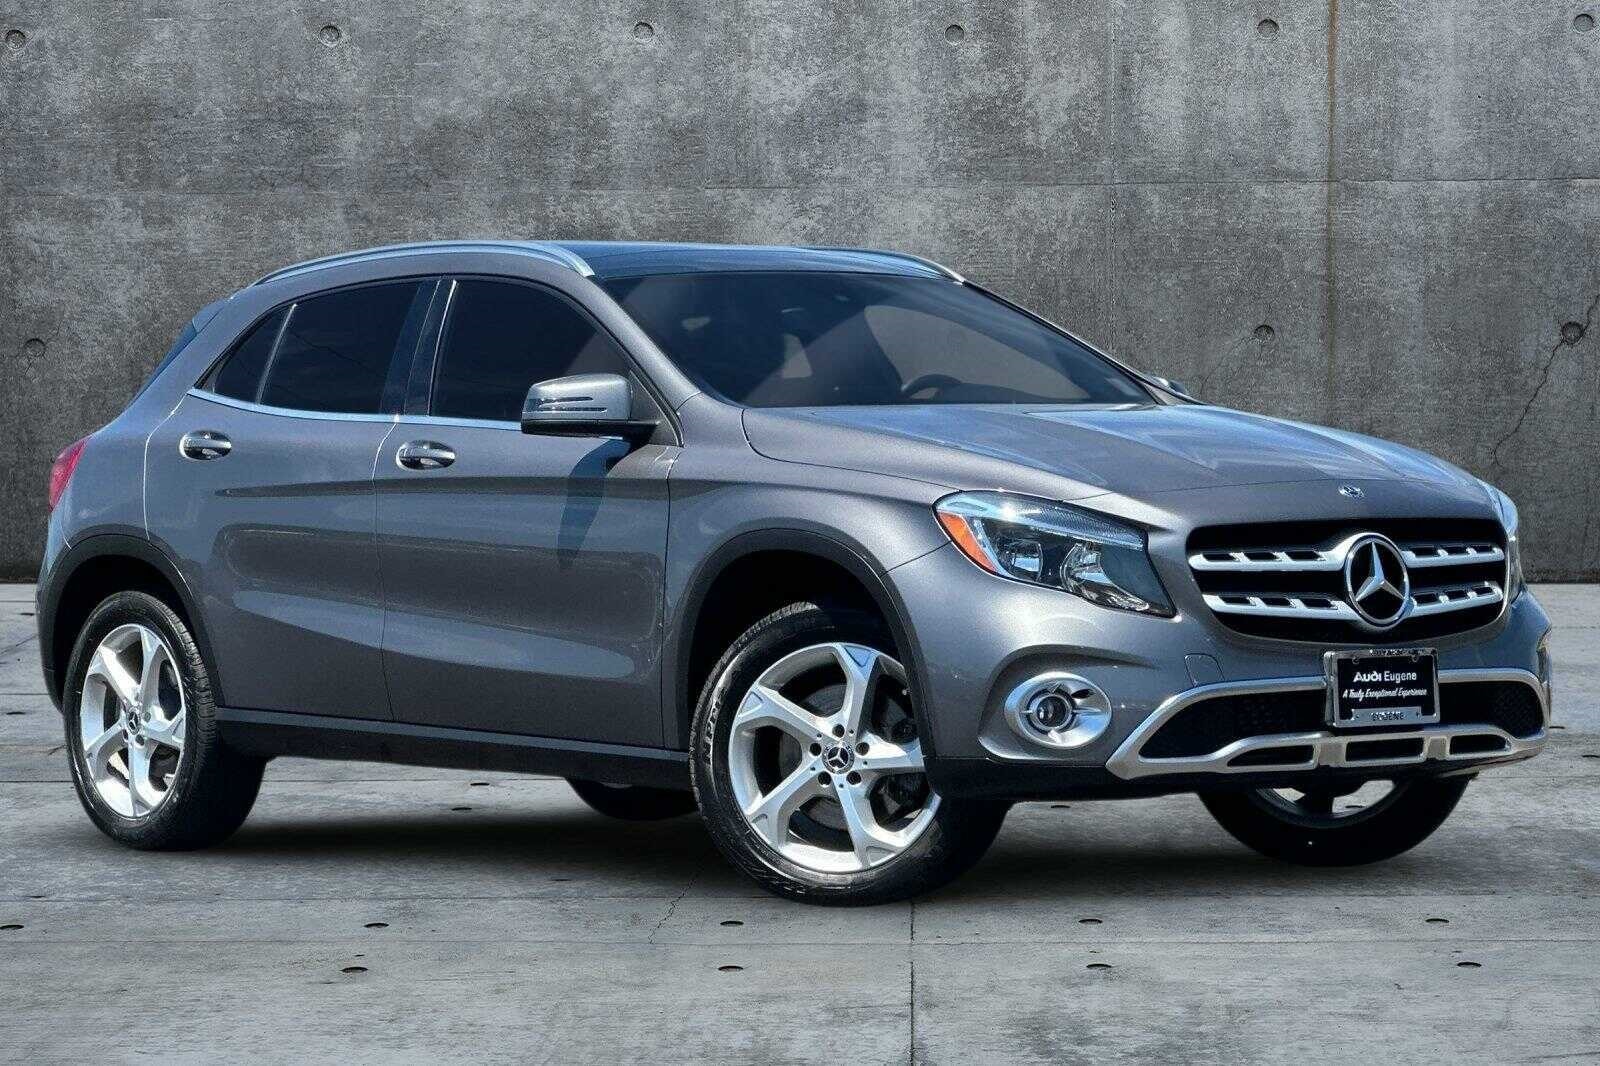 Used 2020 Mercedes-Benz GLA GLA250 with VIN WDCTG4GB2LJ669578 for sale in Eugene, OR